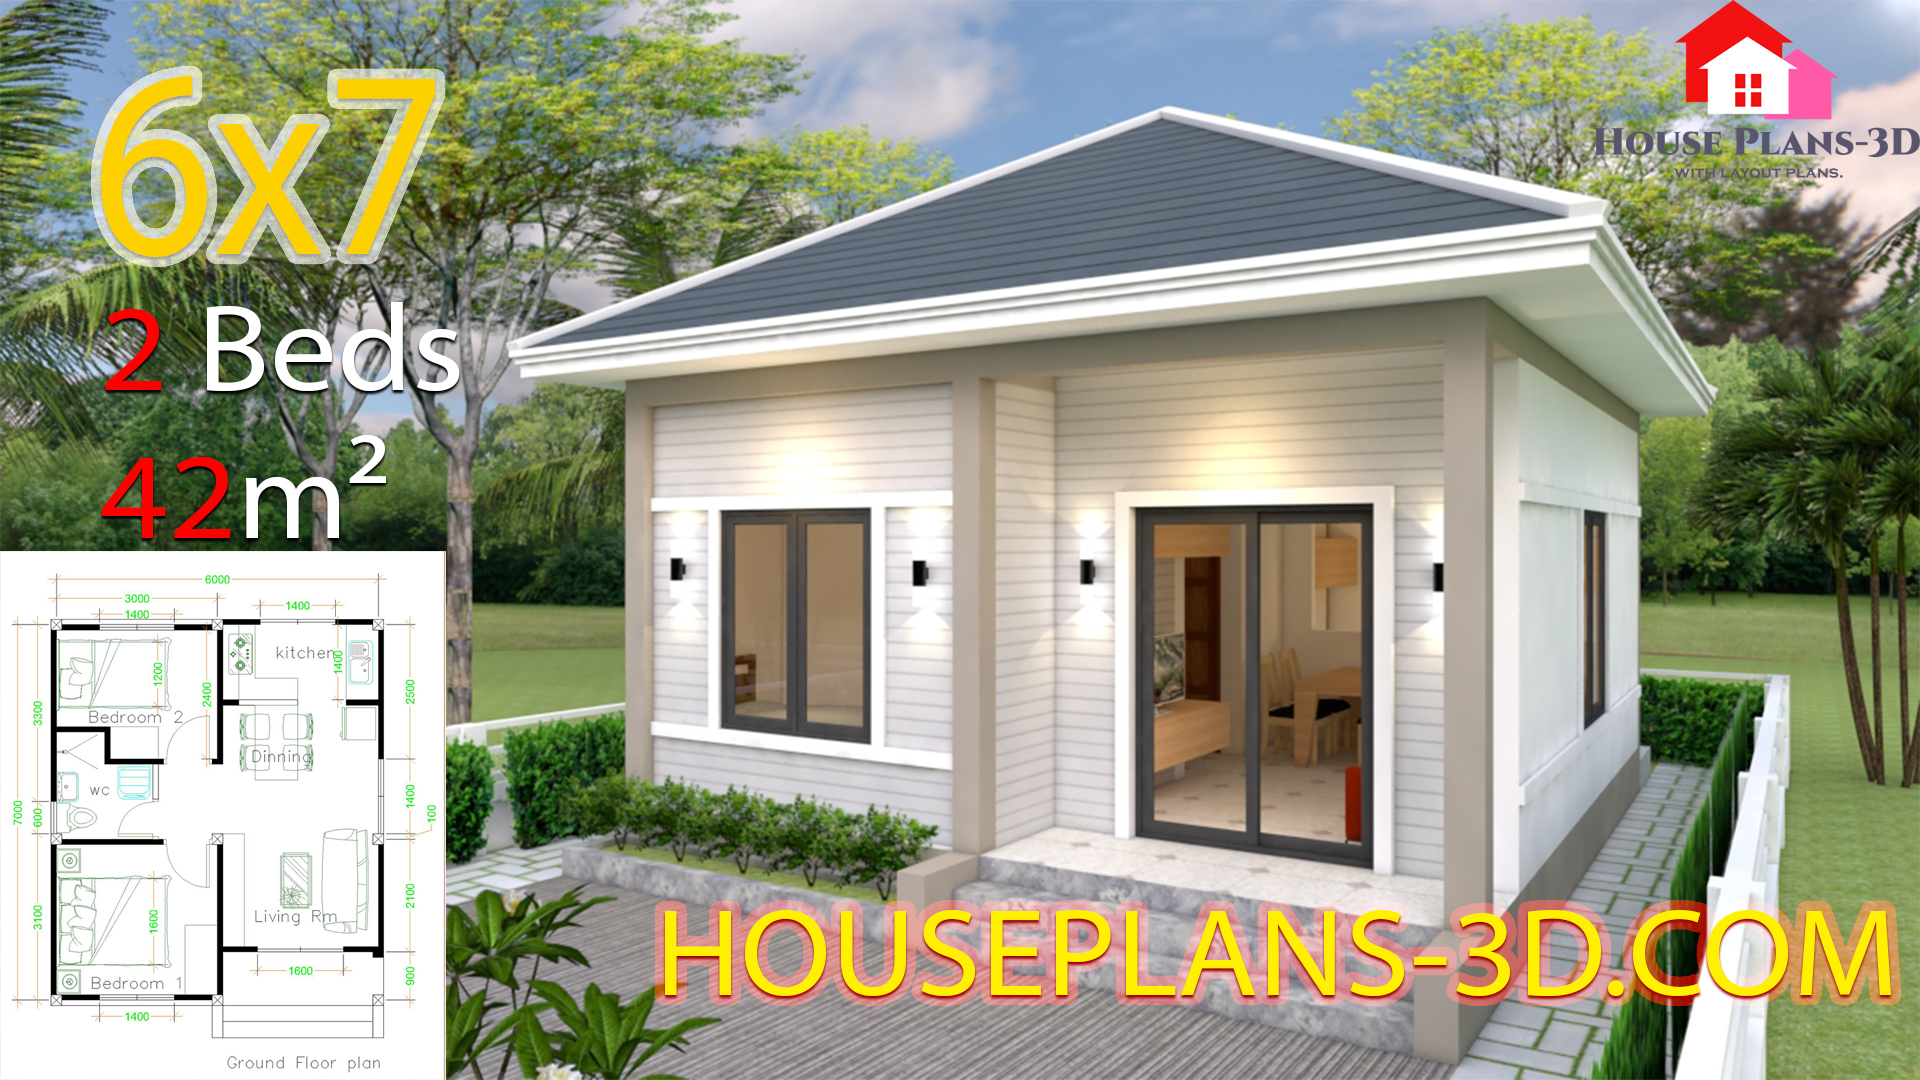 Simple House Plans 6x7 With 2 Bedrooms Hip Roof House Plans 3d